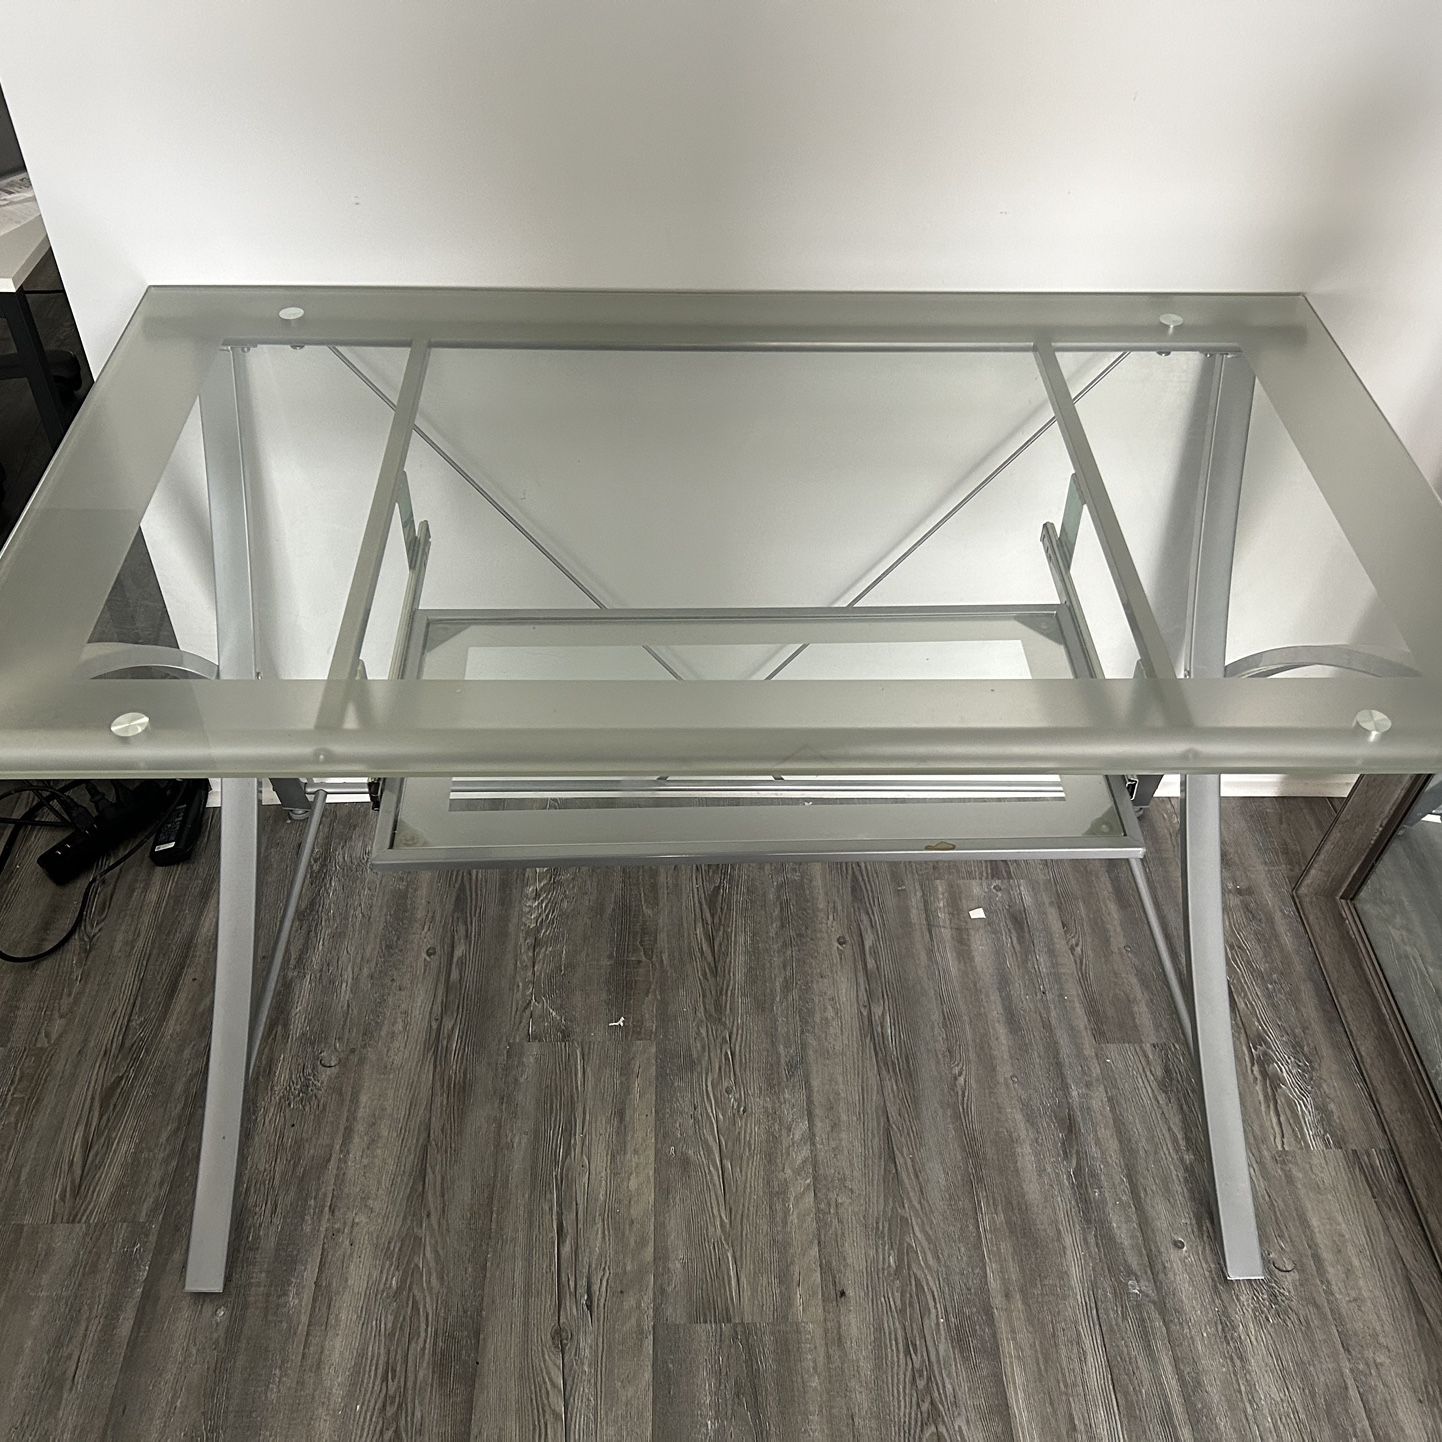 Glass Desk With Pull Shelf For Keyboard 